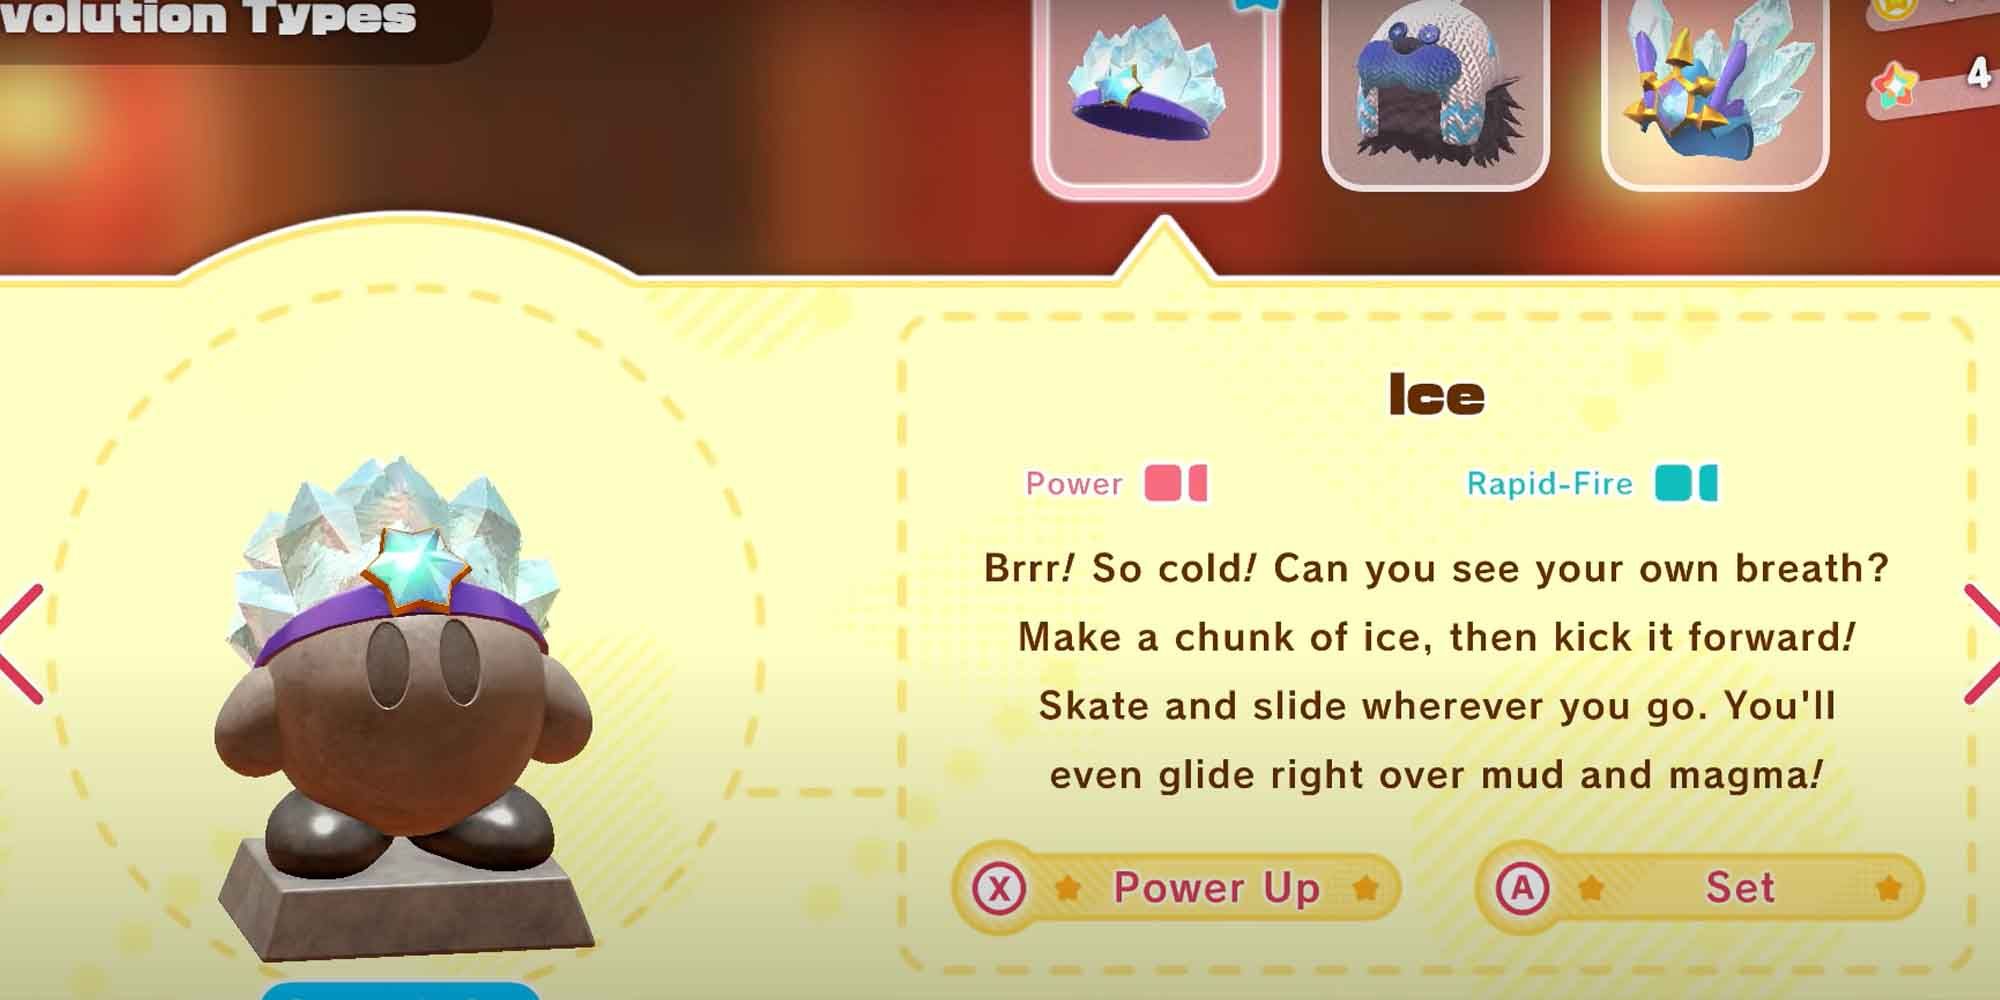 The Ice copy ability in Kirby in The Forgotten Land